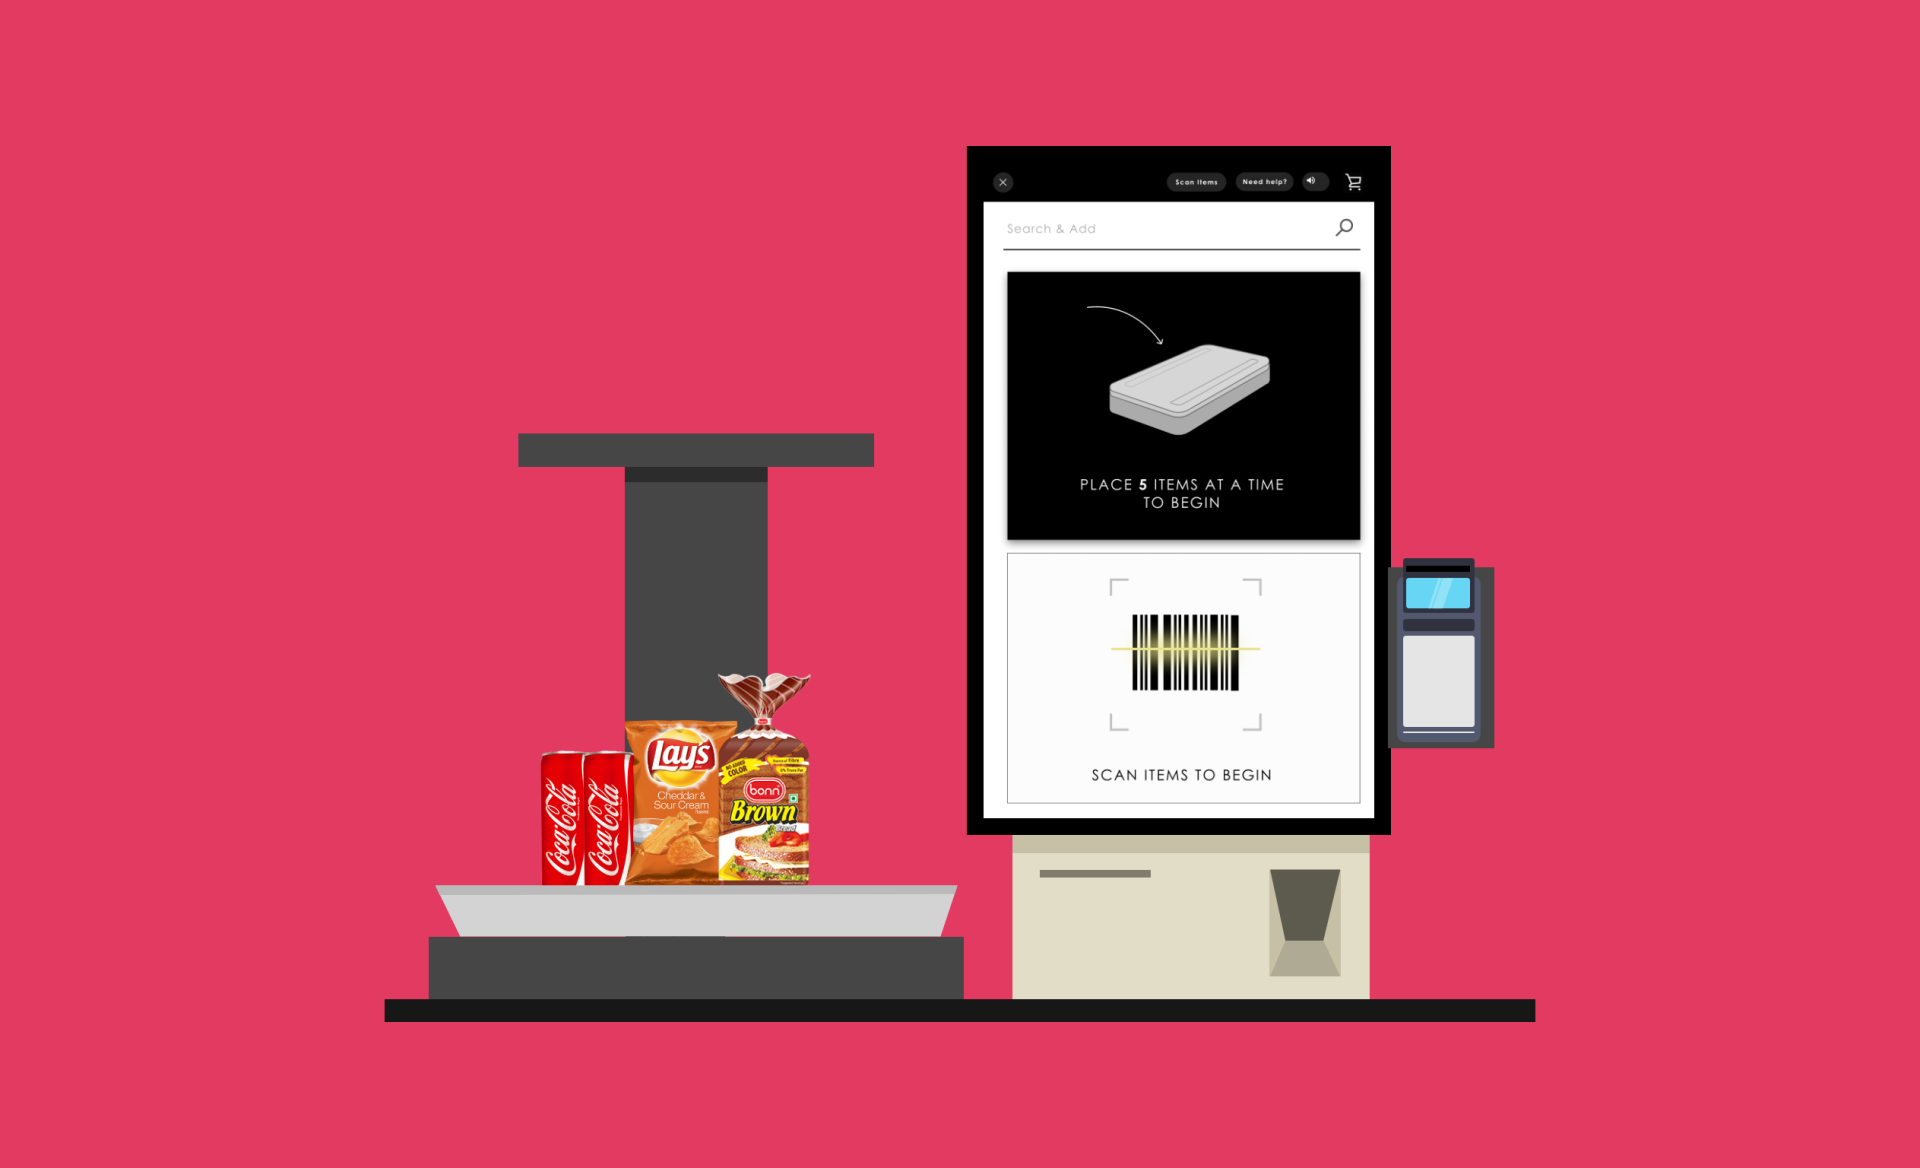 Designing the self-checkout experience